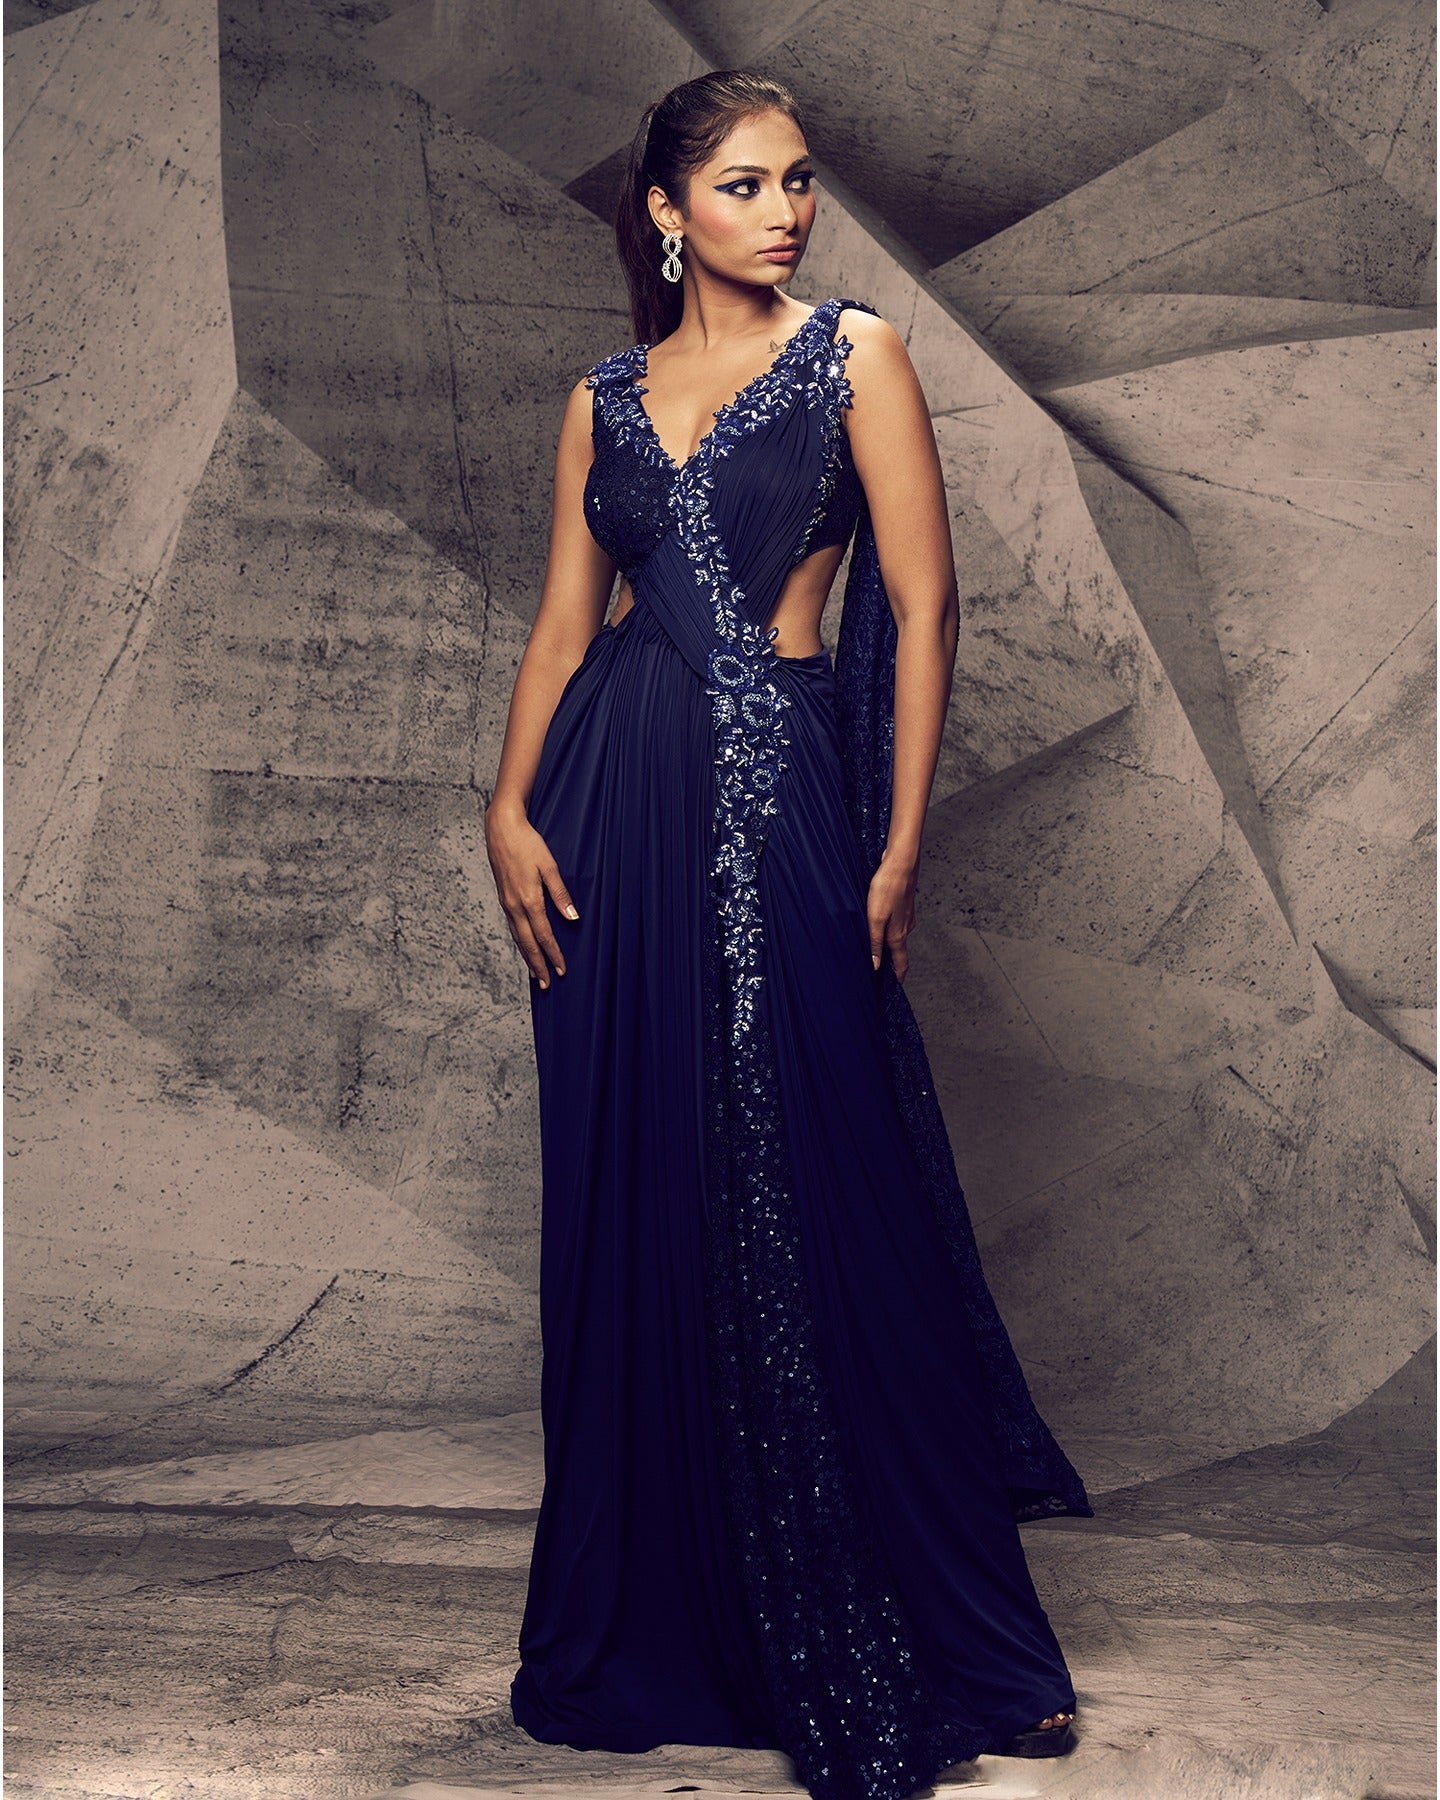 Draped in the rich hues of blue, this gown is a masterpiece of glamour and sophistication. 